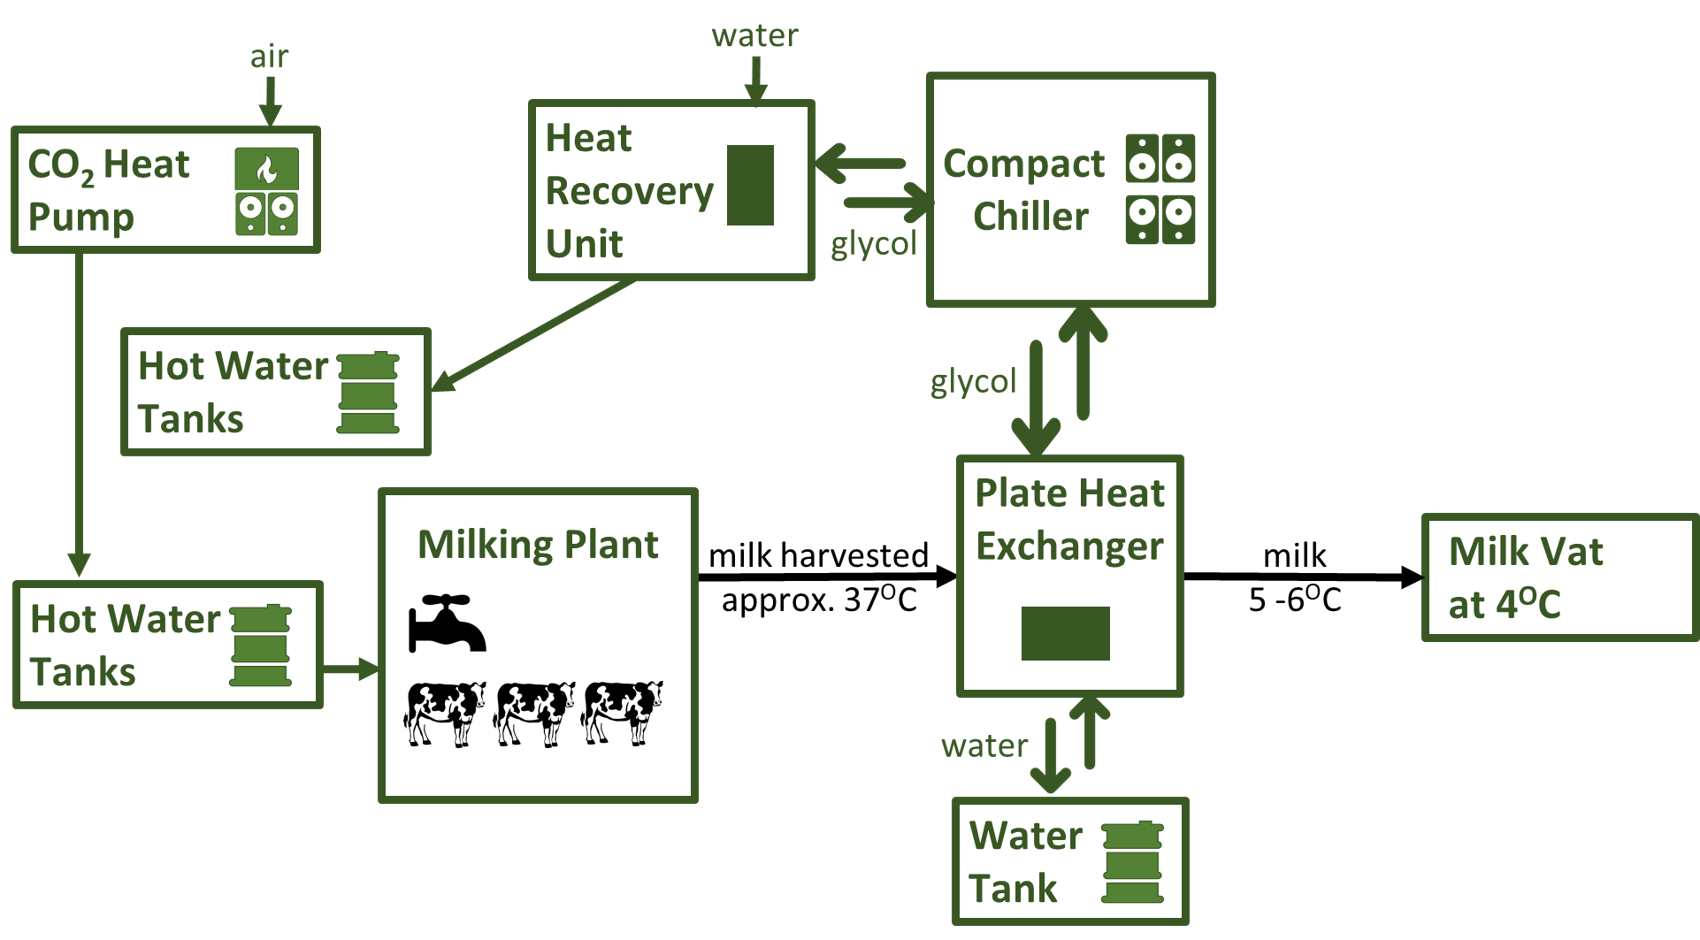 Diagram showing energy use in the dairy